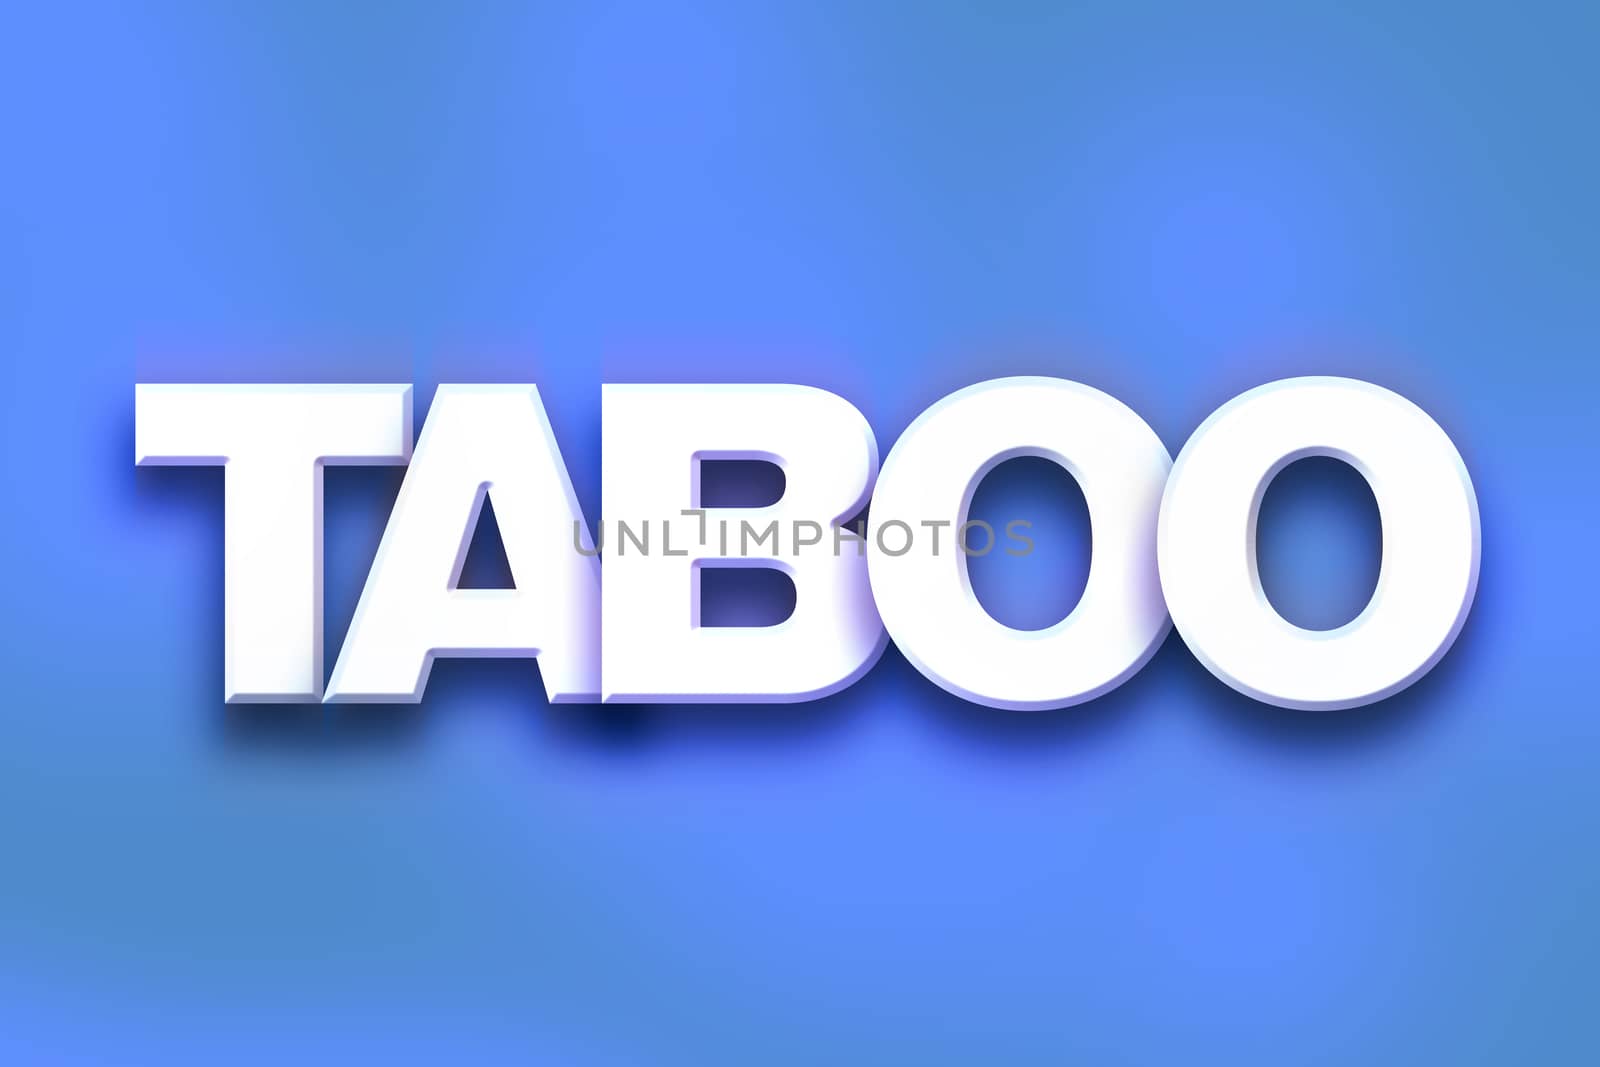 The word "Taboo" written in white 3D letters on a colorful background concept and theme.